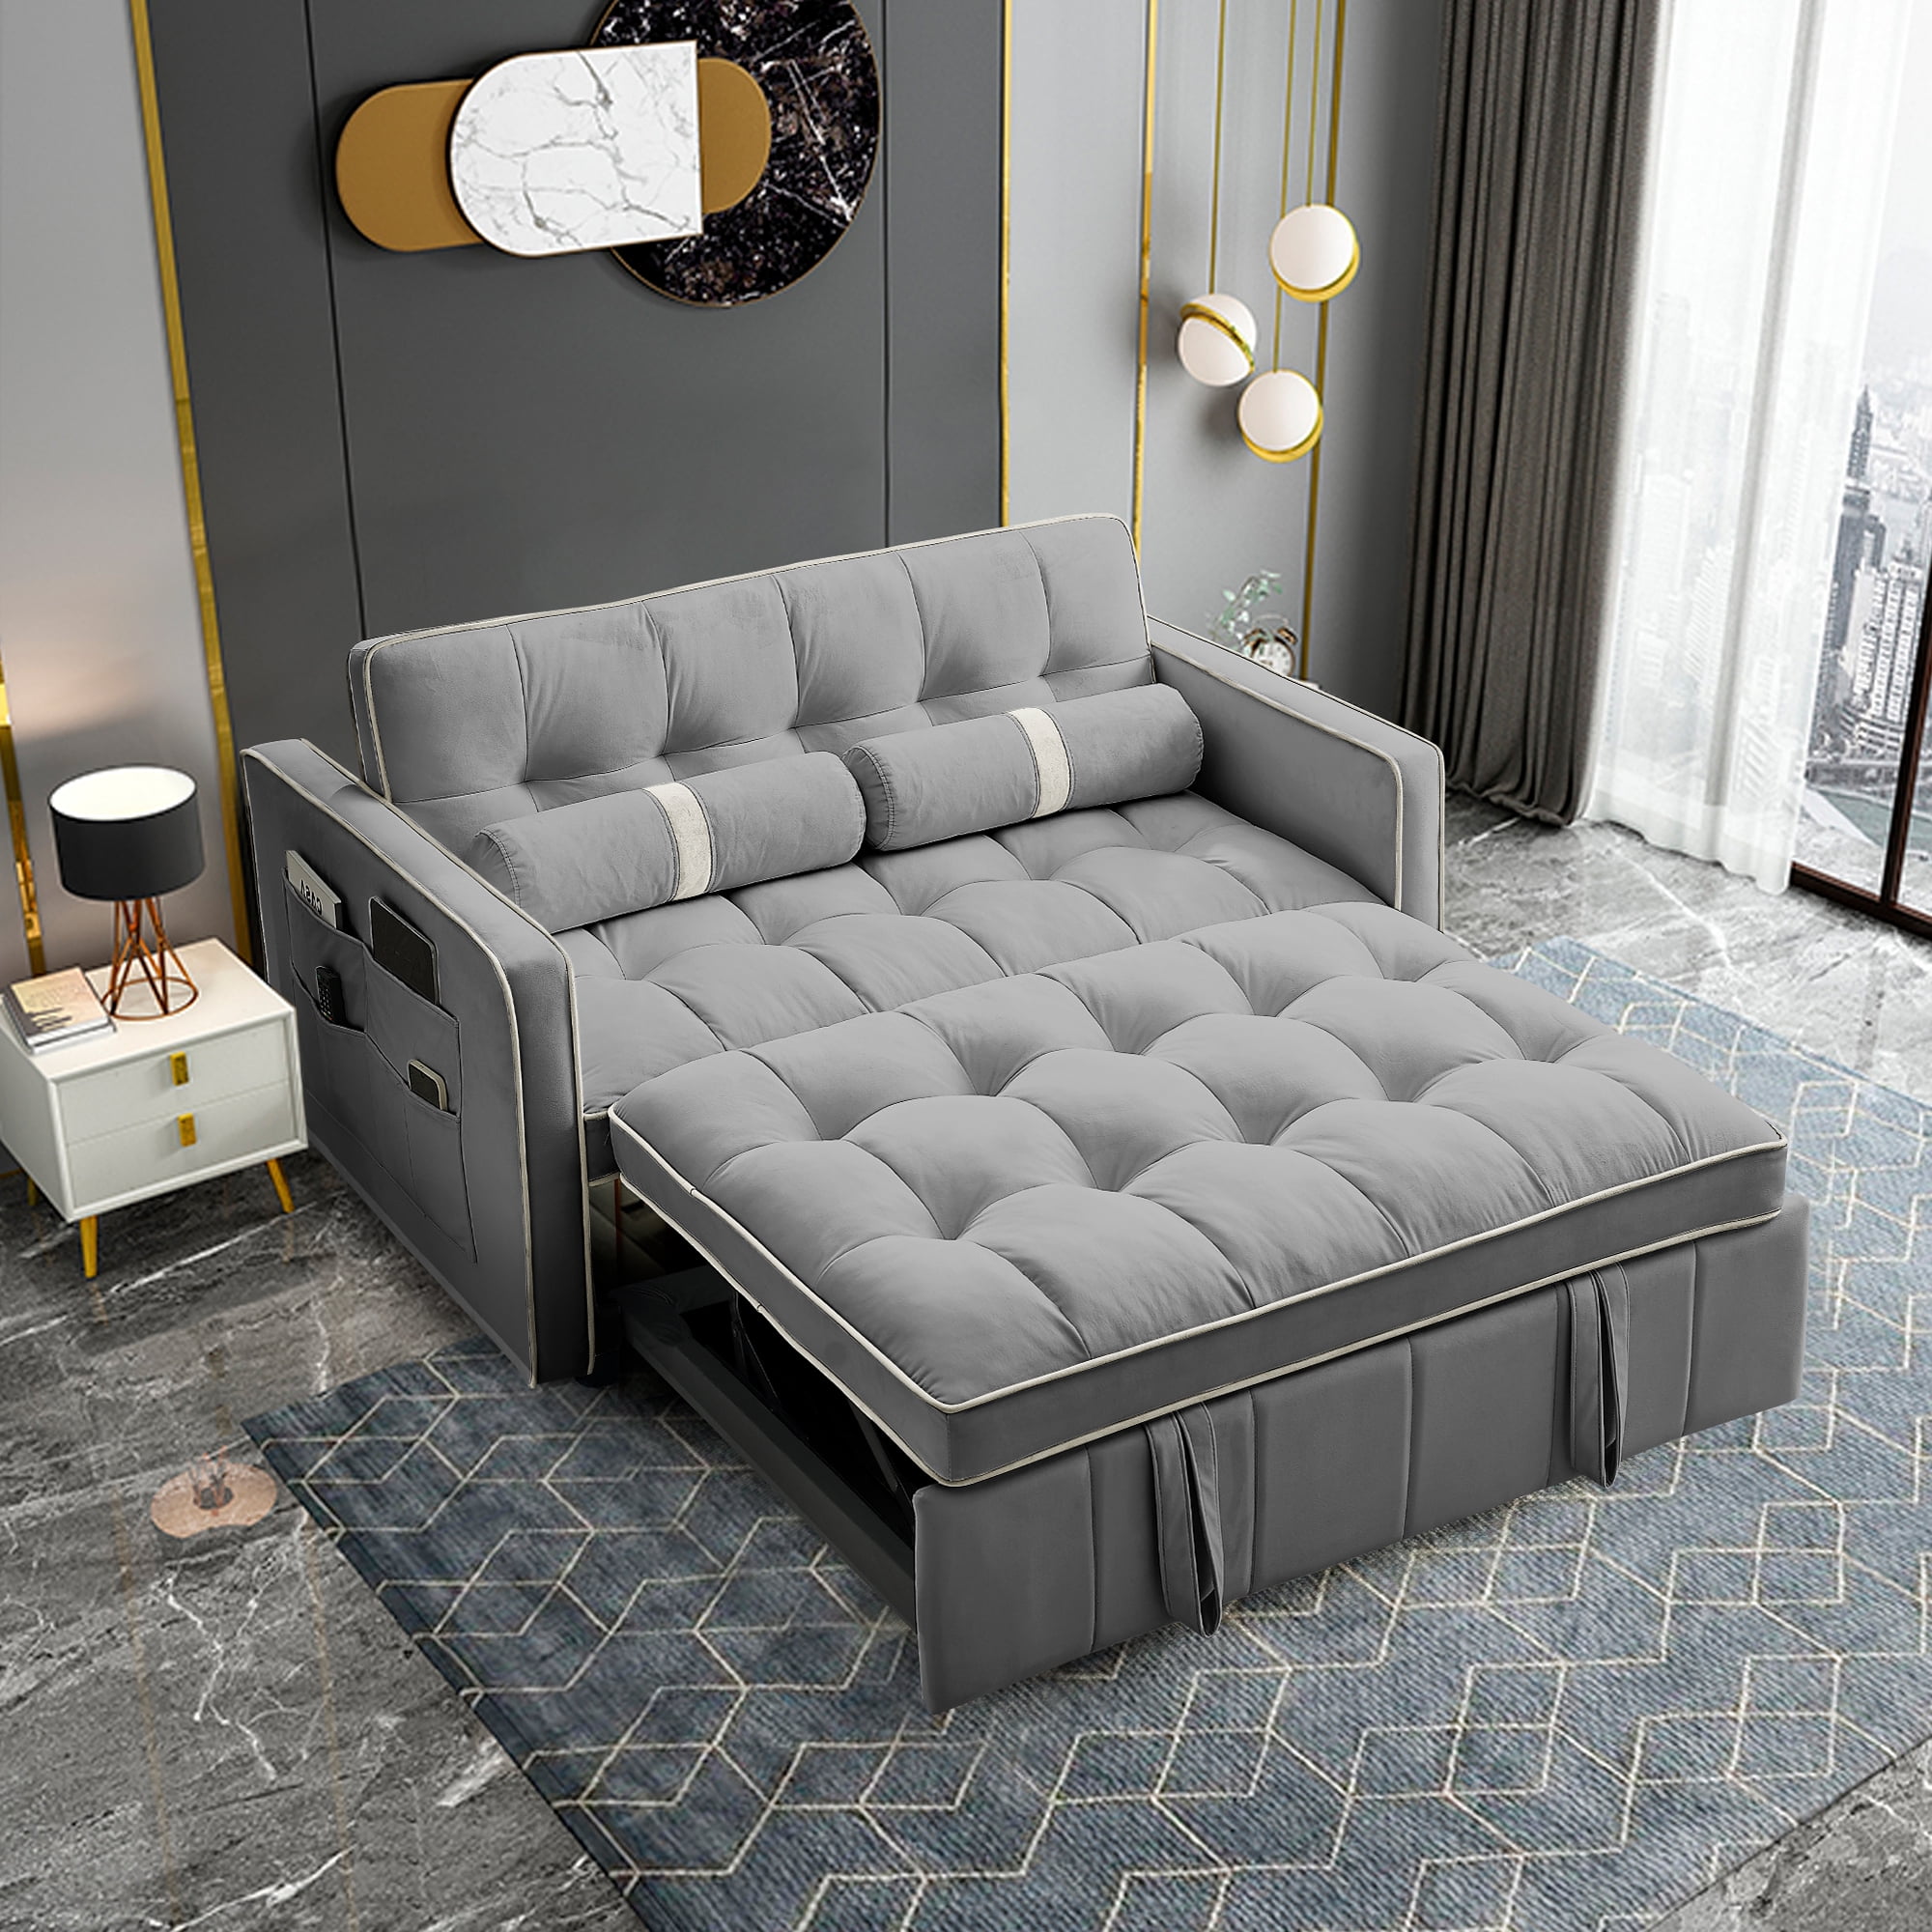 rester deformation fritid KINFFICT Futon Sofa Bed, Convertible Sleeper Sofa Bed with Pull Out Couch,  Modern Velvet Loveseat Sleeper, Small Couch for Living Room, Gray -  Walmart.com